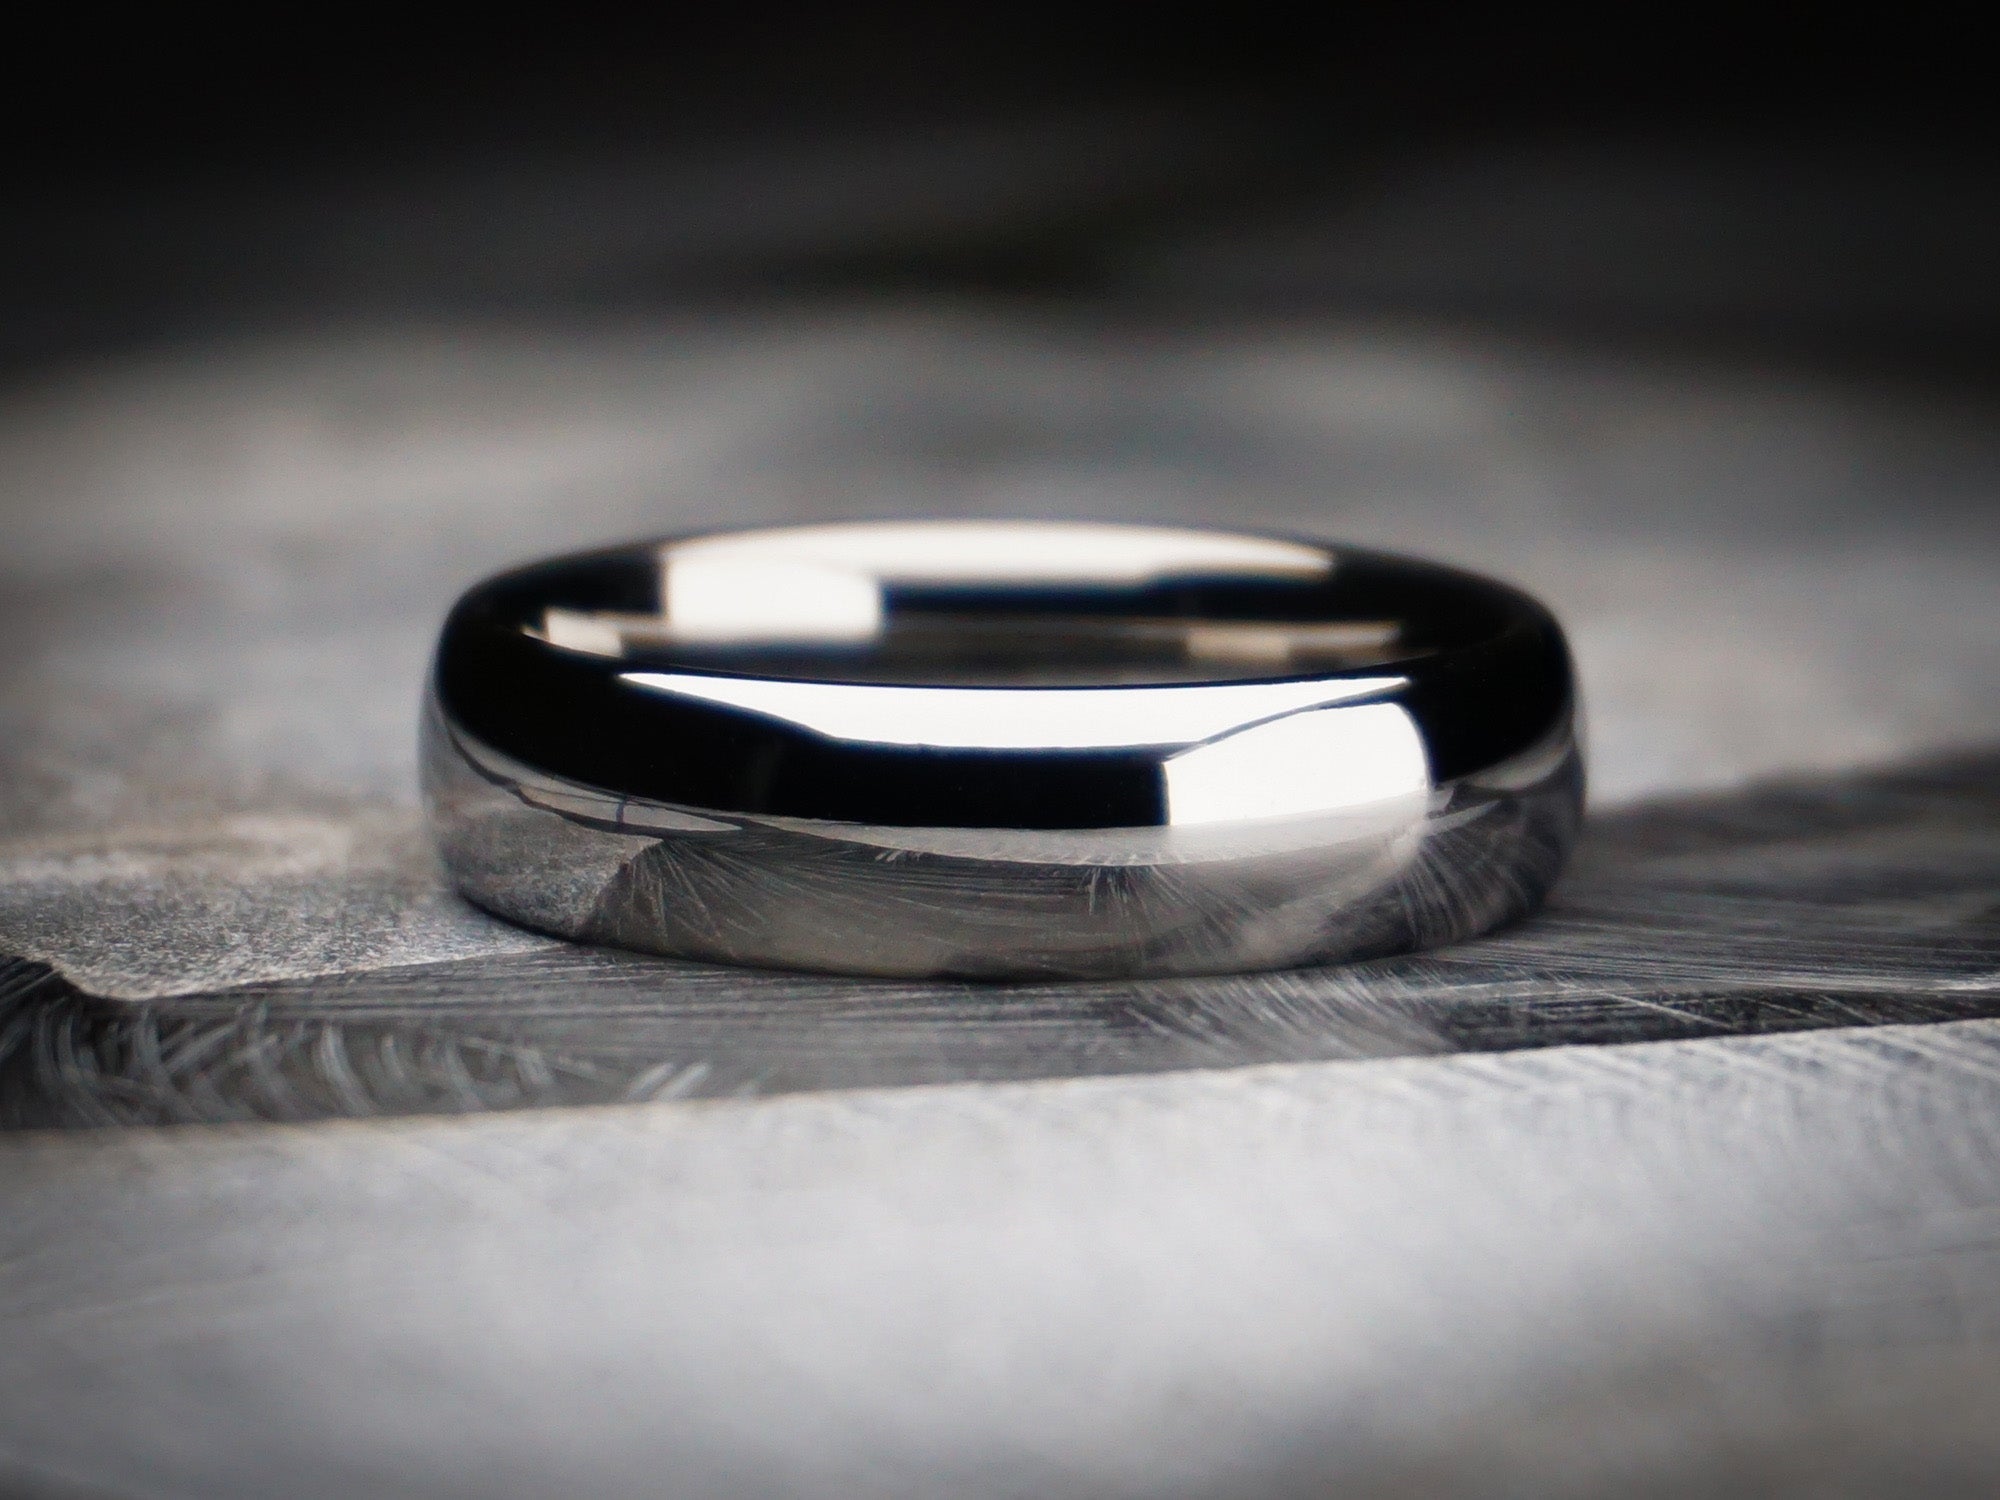 silver polished ring, unplated classic silver shiny tungsten ring, 6mm width, unique mens wedding ring, dark stone